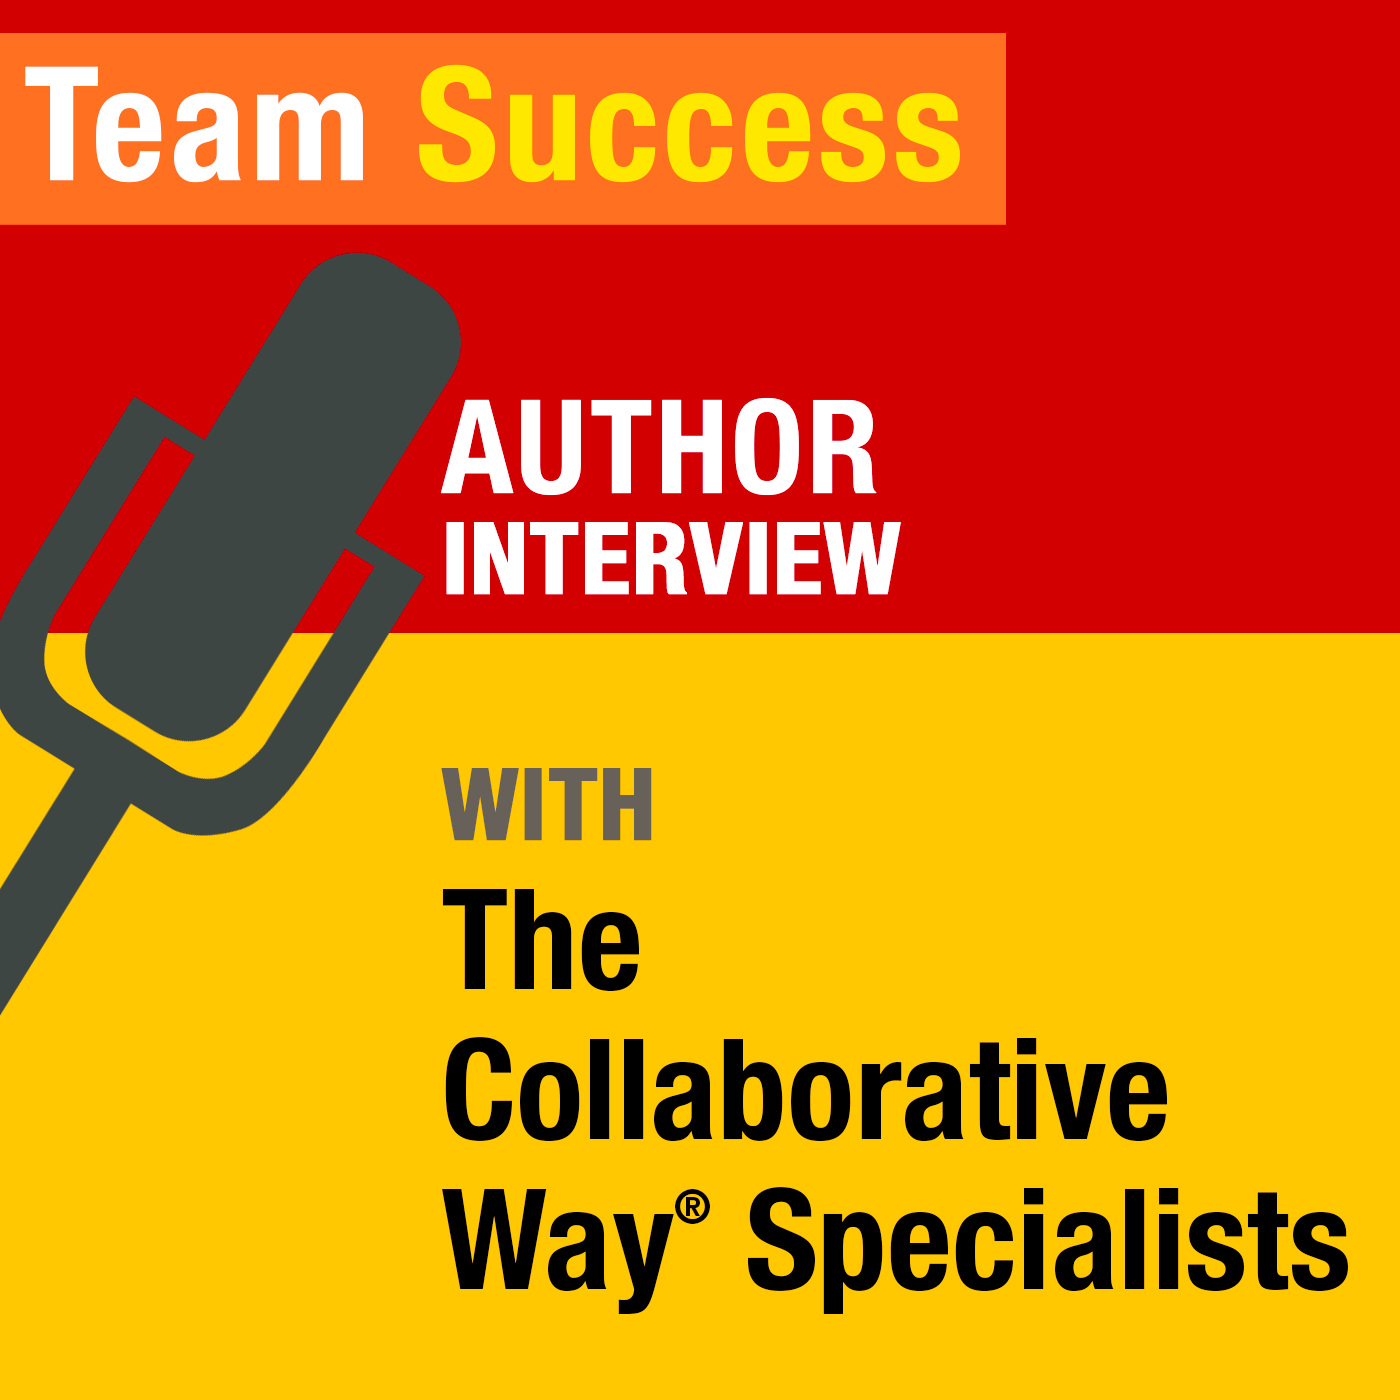 Author Interview With The Collaborative Way Specialists